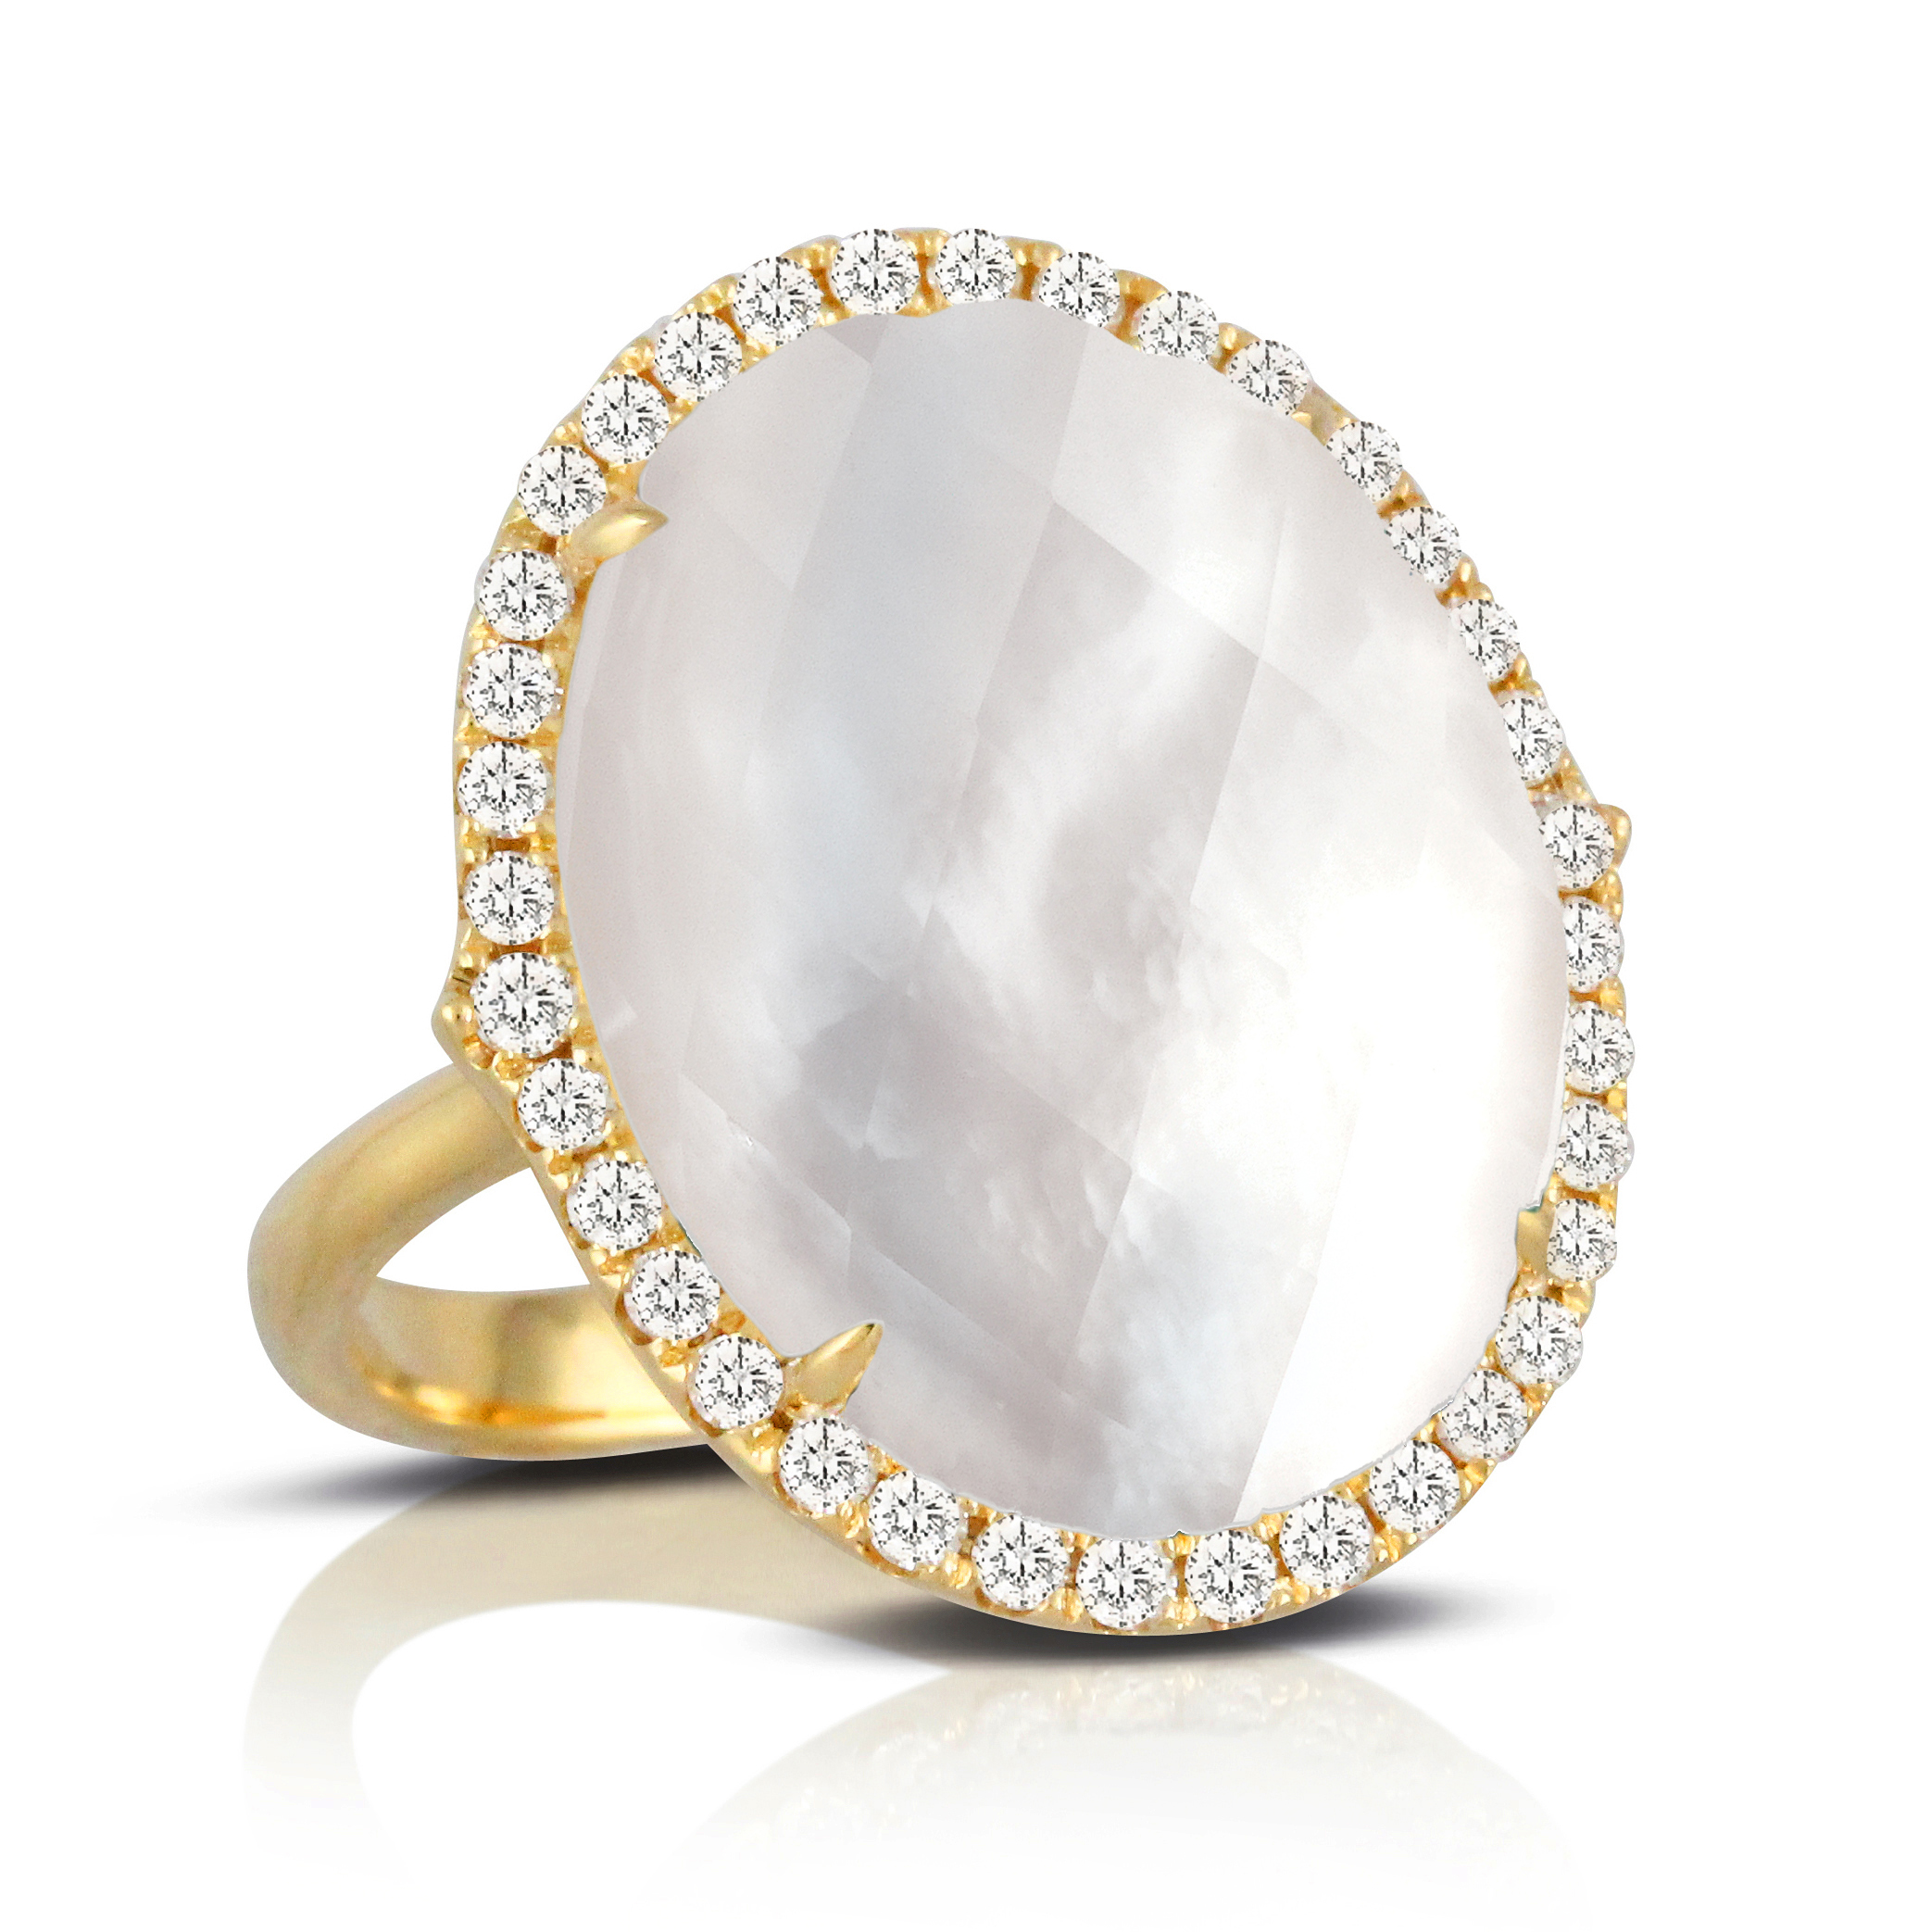 18K Yellow Gold Pearl Fashion Ring - 18K Yellow Gold Diamond Ring With Clear Quartz Over White Mother Of Pearl